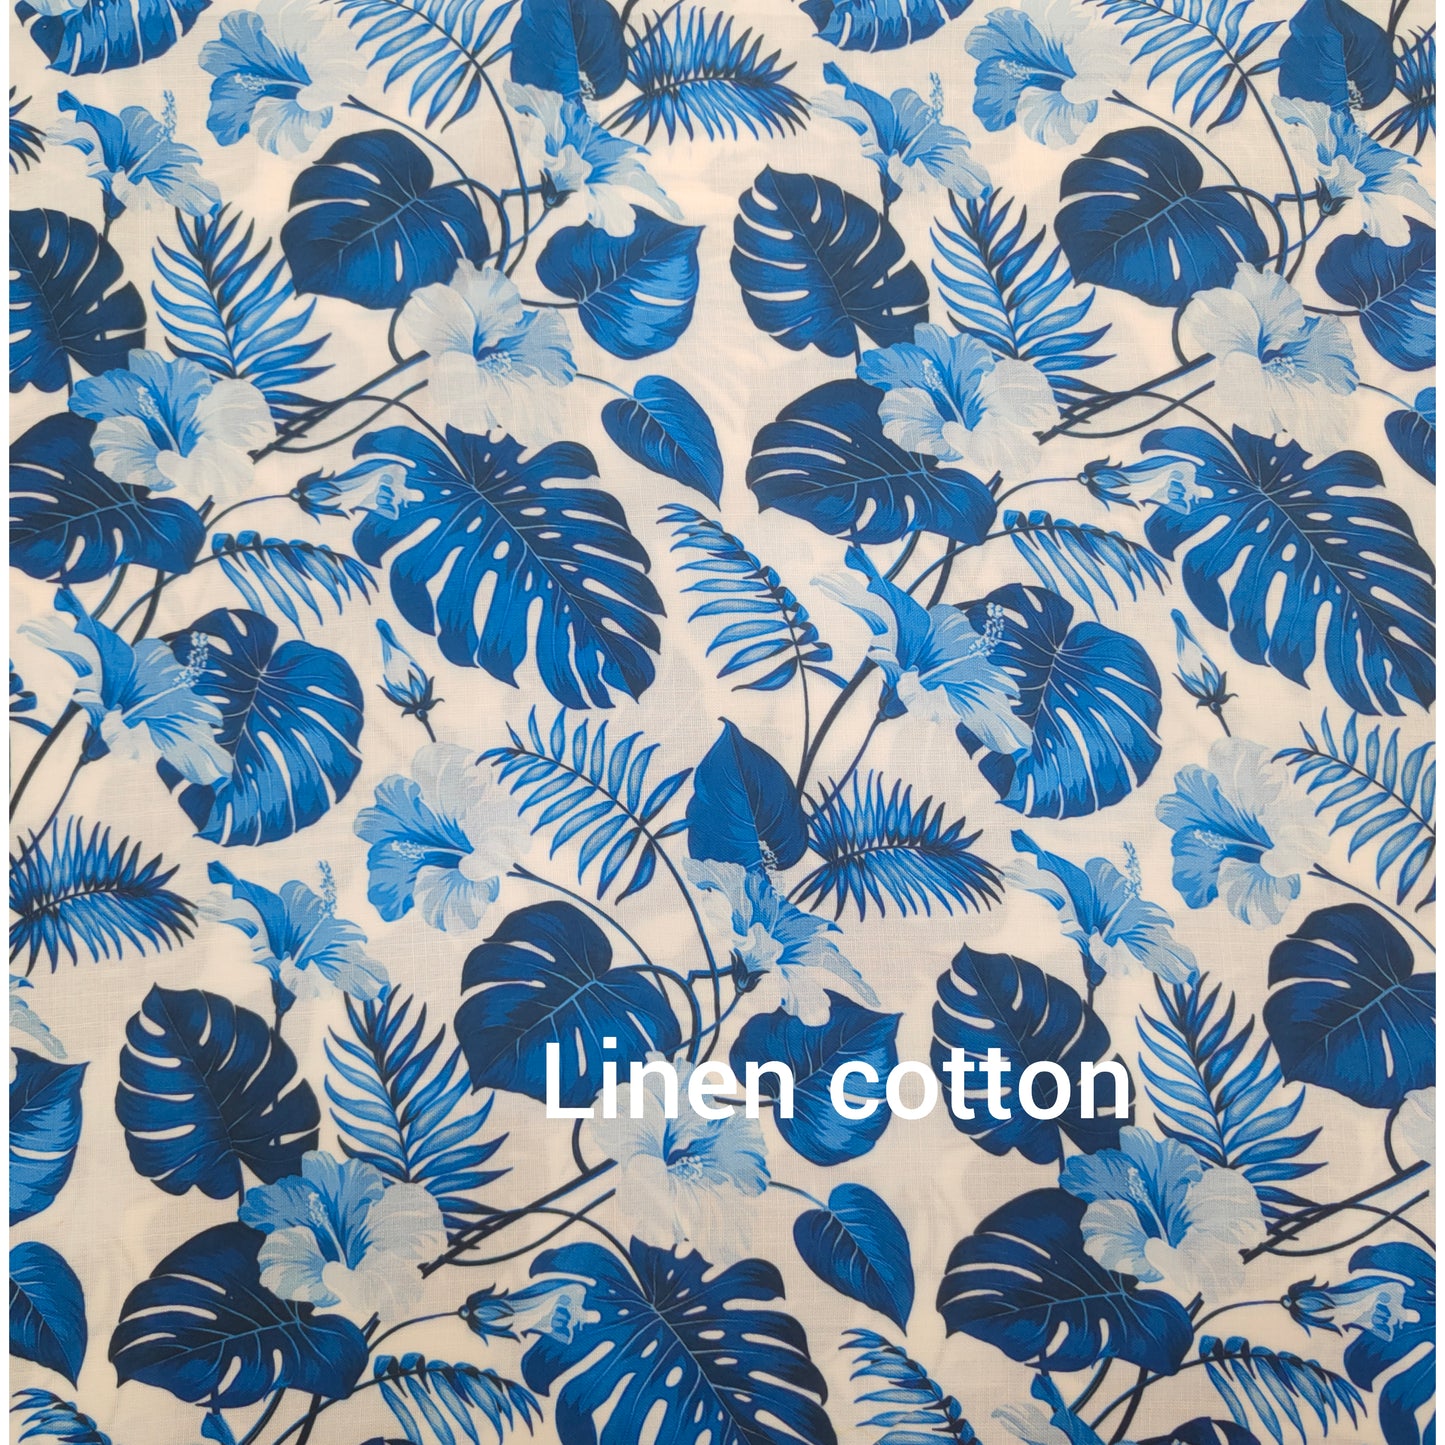 Linen Cotton Fabric with Nature Inspired Prints in Royal Blue